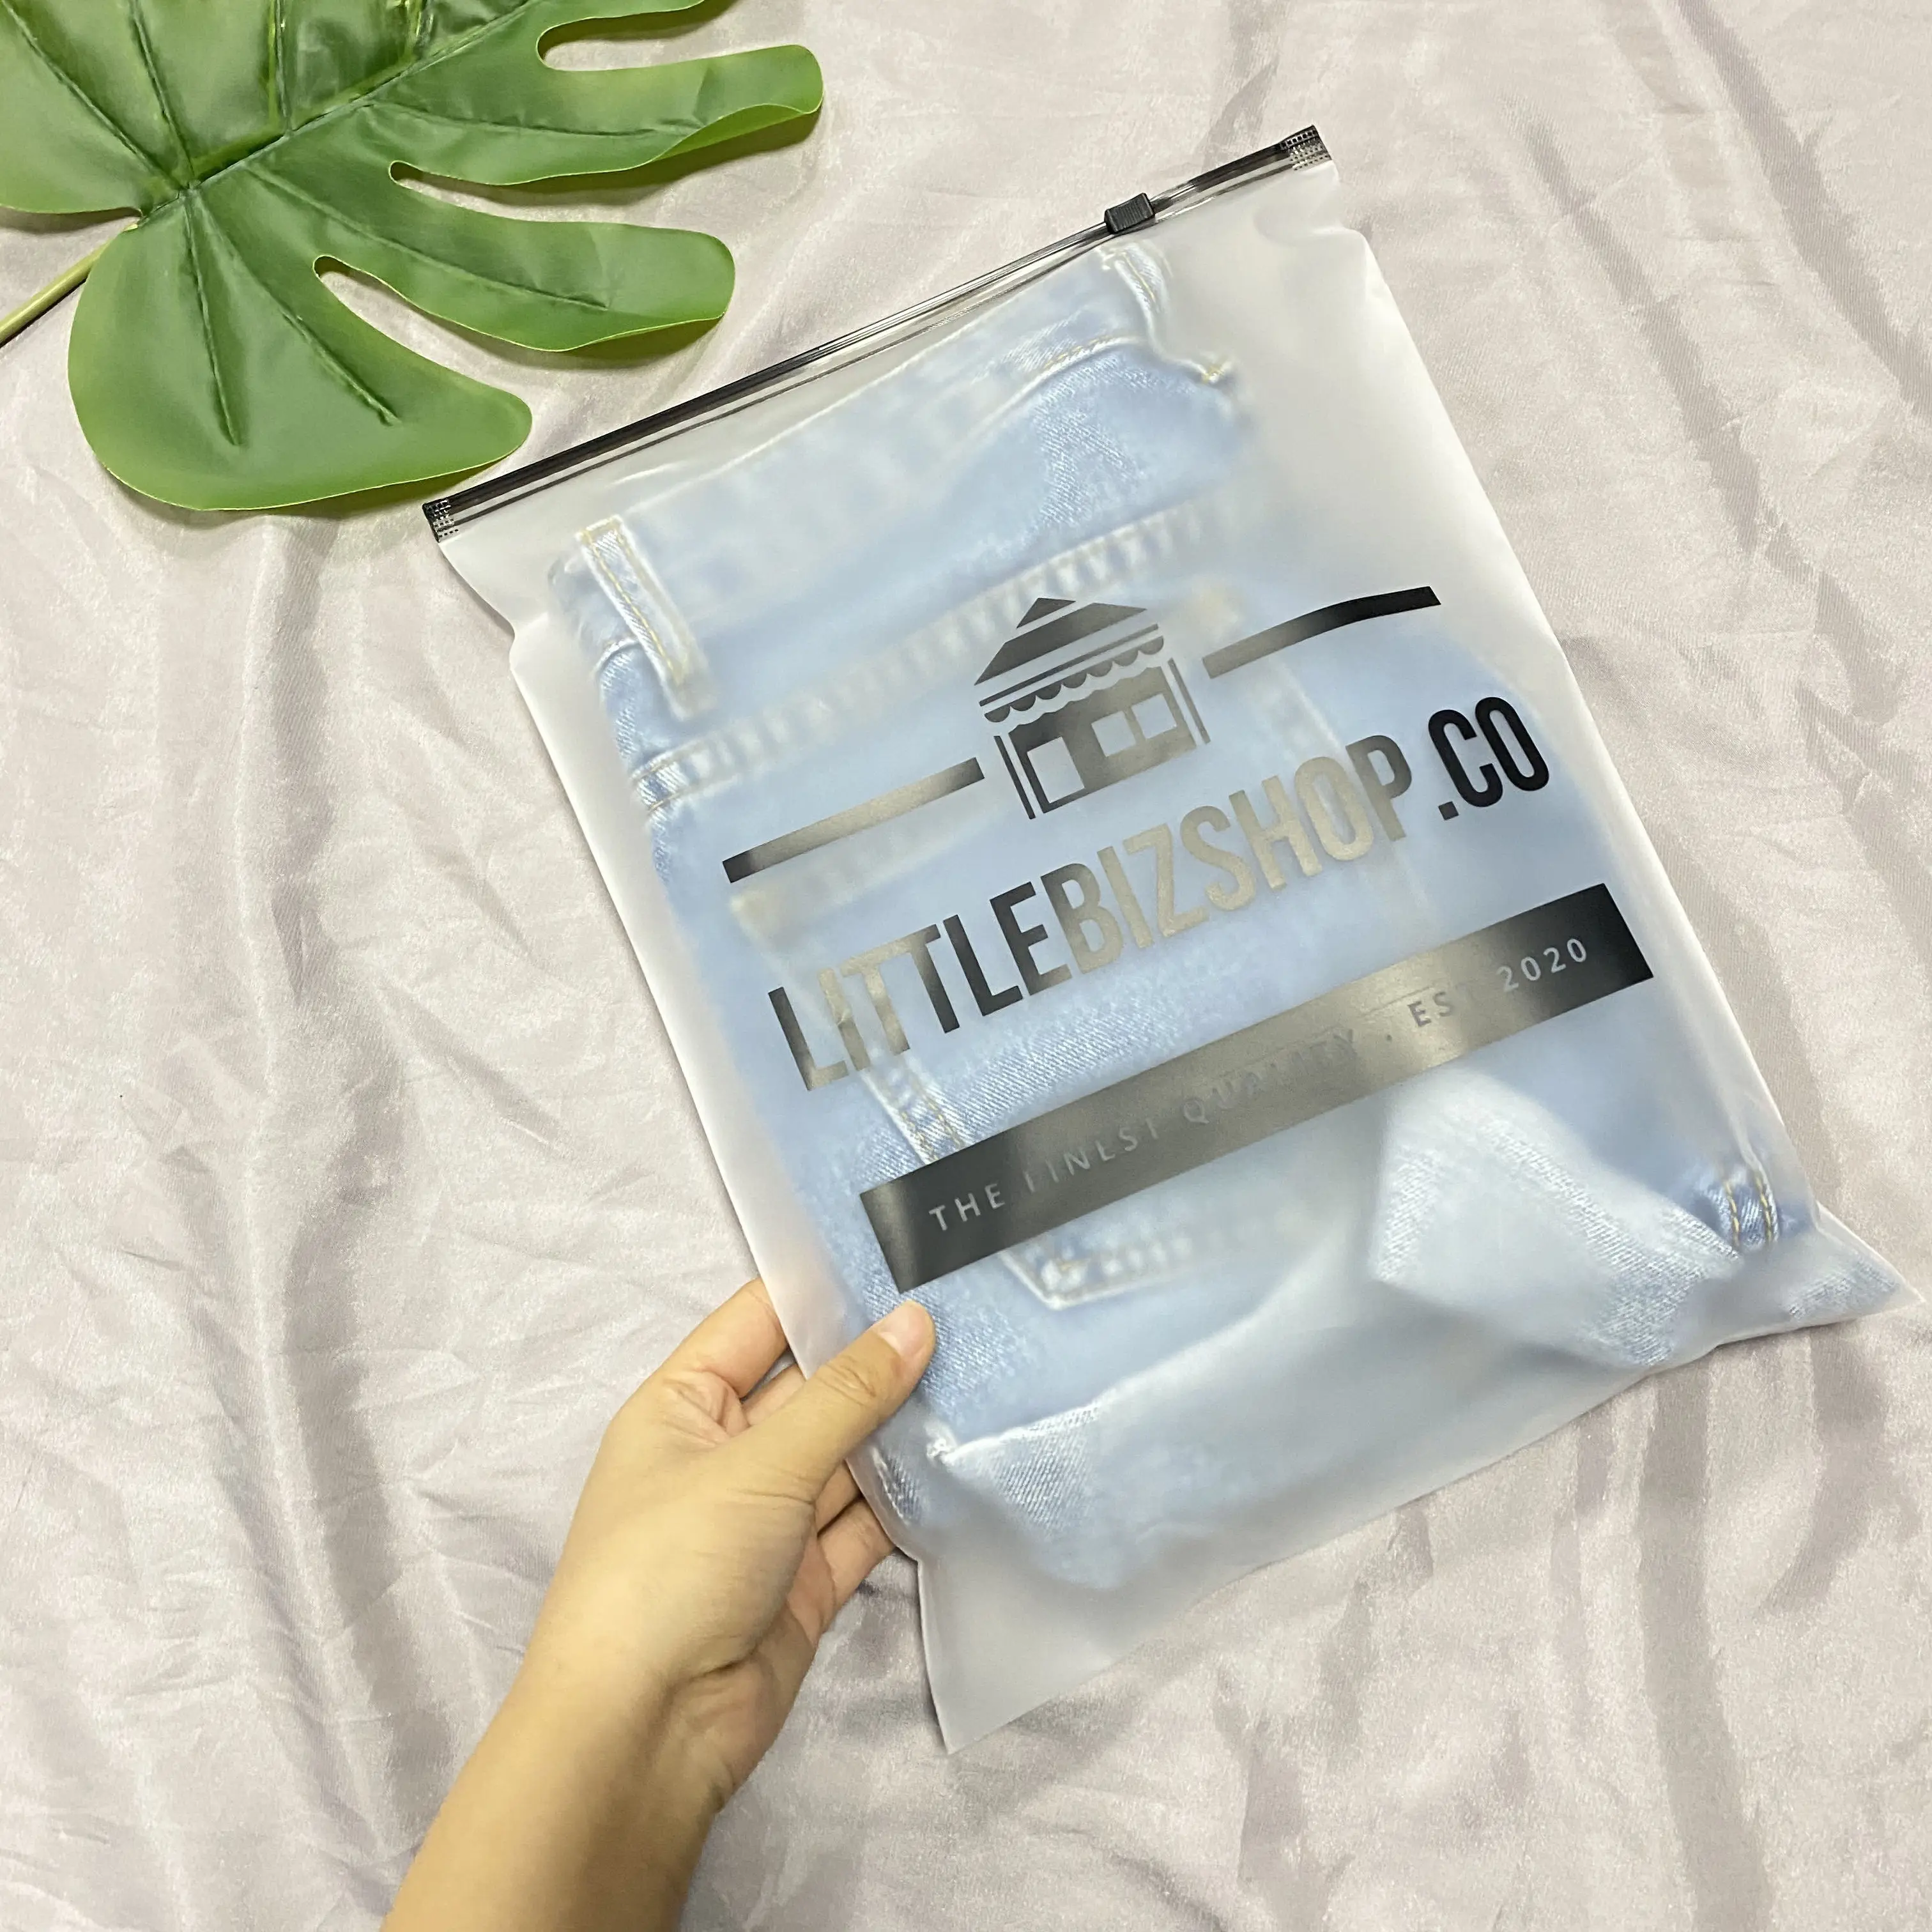 0.2mm Double-Sided Frosted Slider Lock Plastic Packaging Bags 